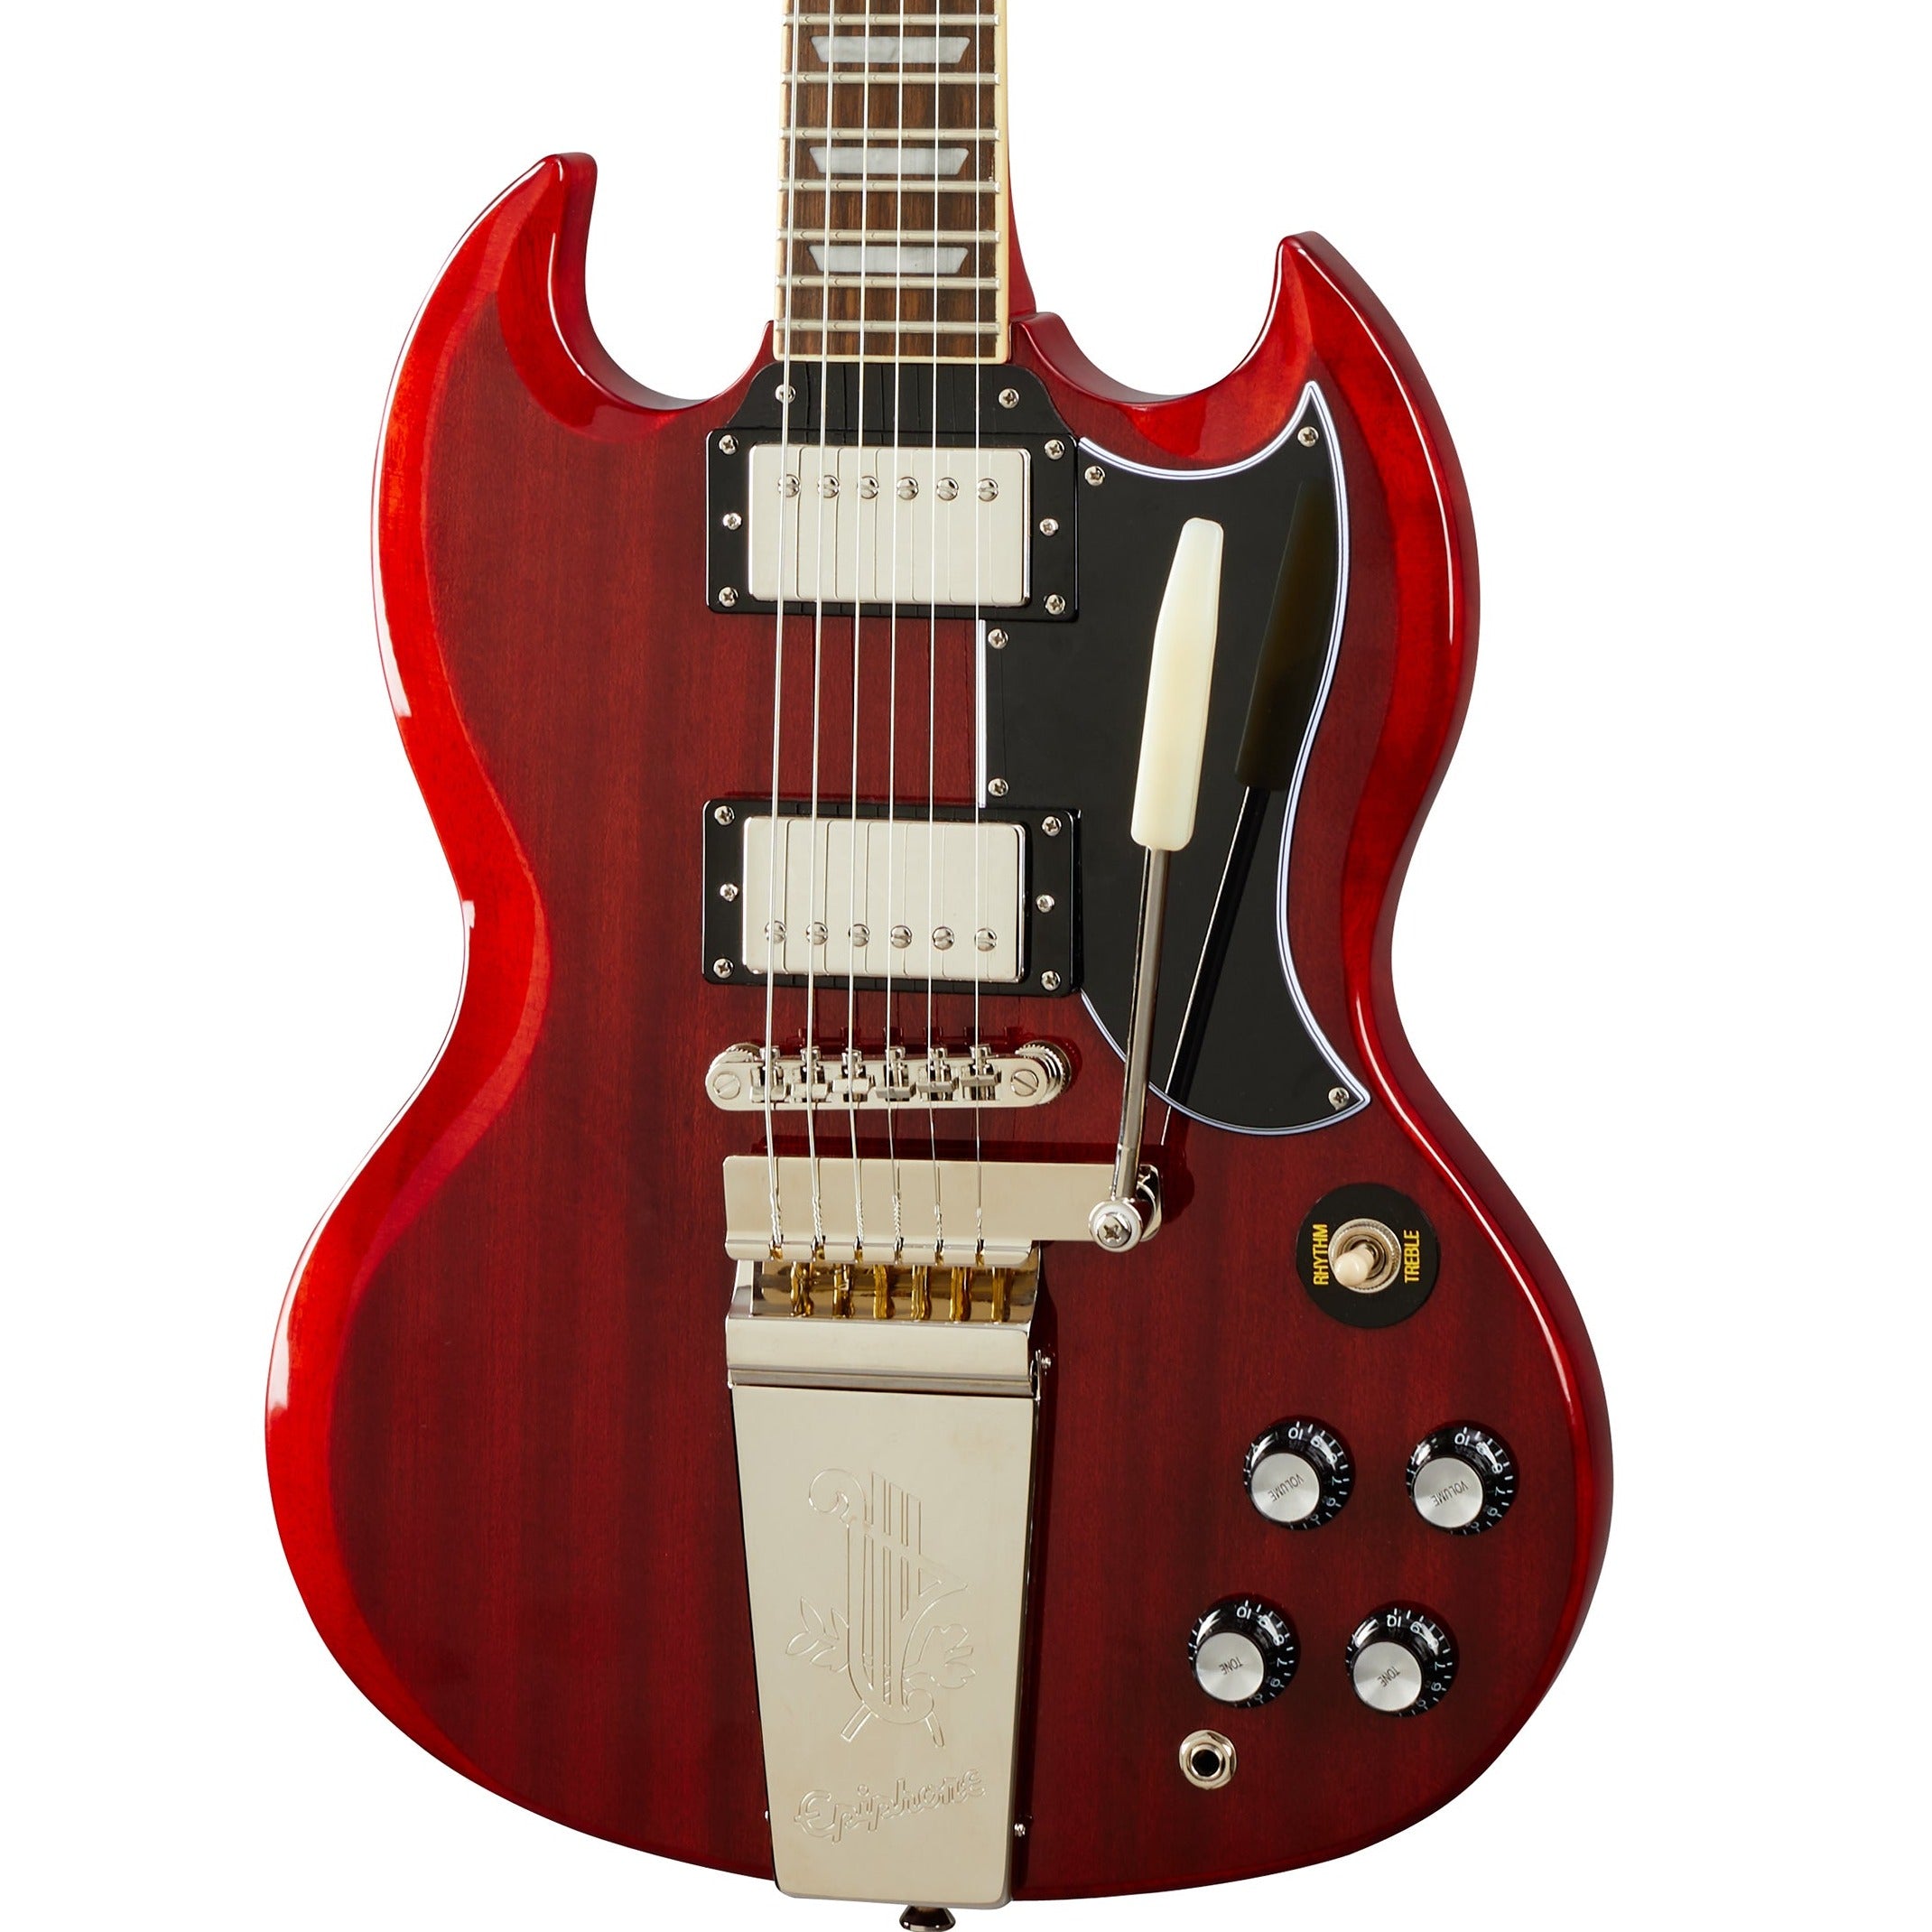 Epiphone SG Standard 60s Maestro Vibrola, Vintage Cherry - Inspired by Gibson